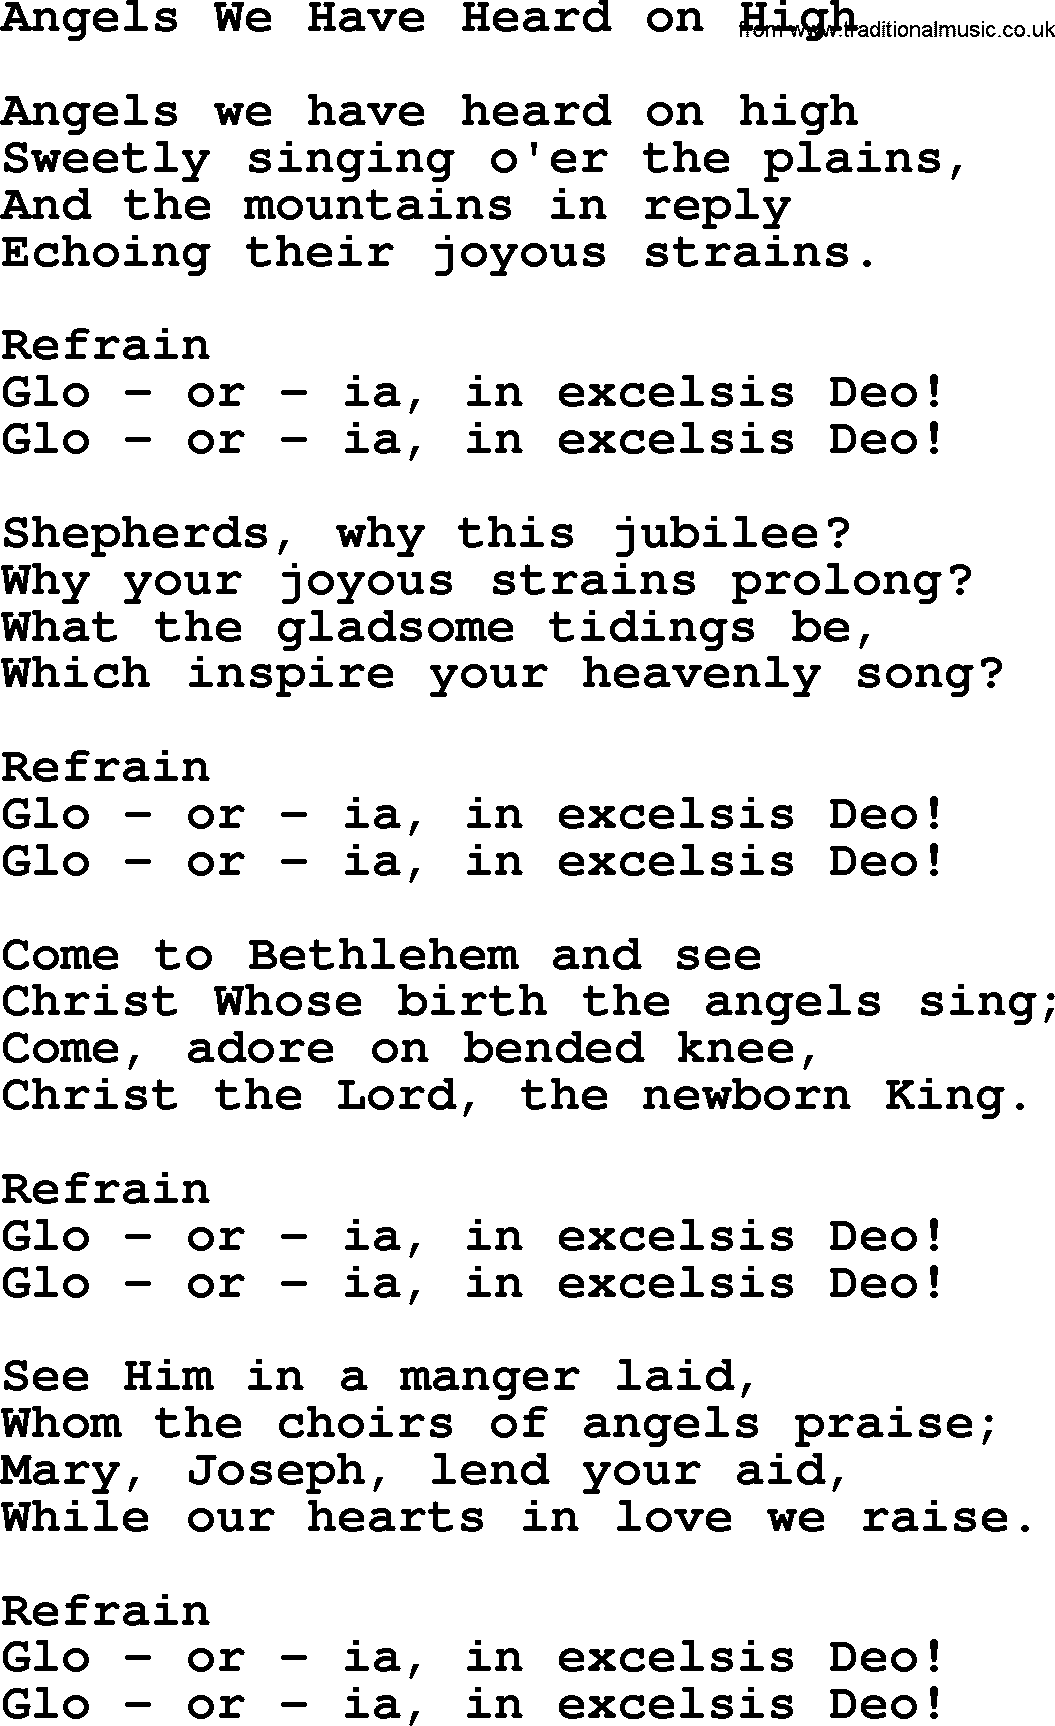 Baptist Hymnal, Christian Song: Angels We Have Heard On High- lyrics with PDF for printing